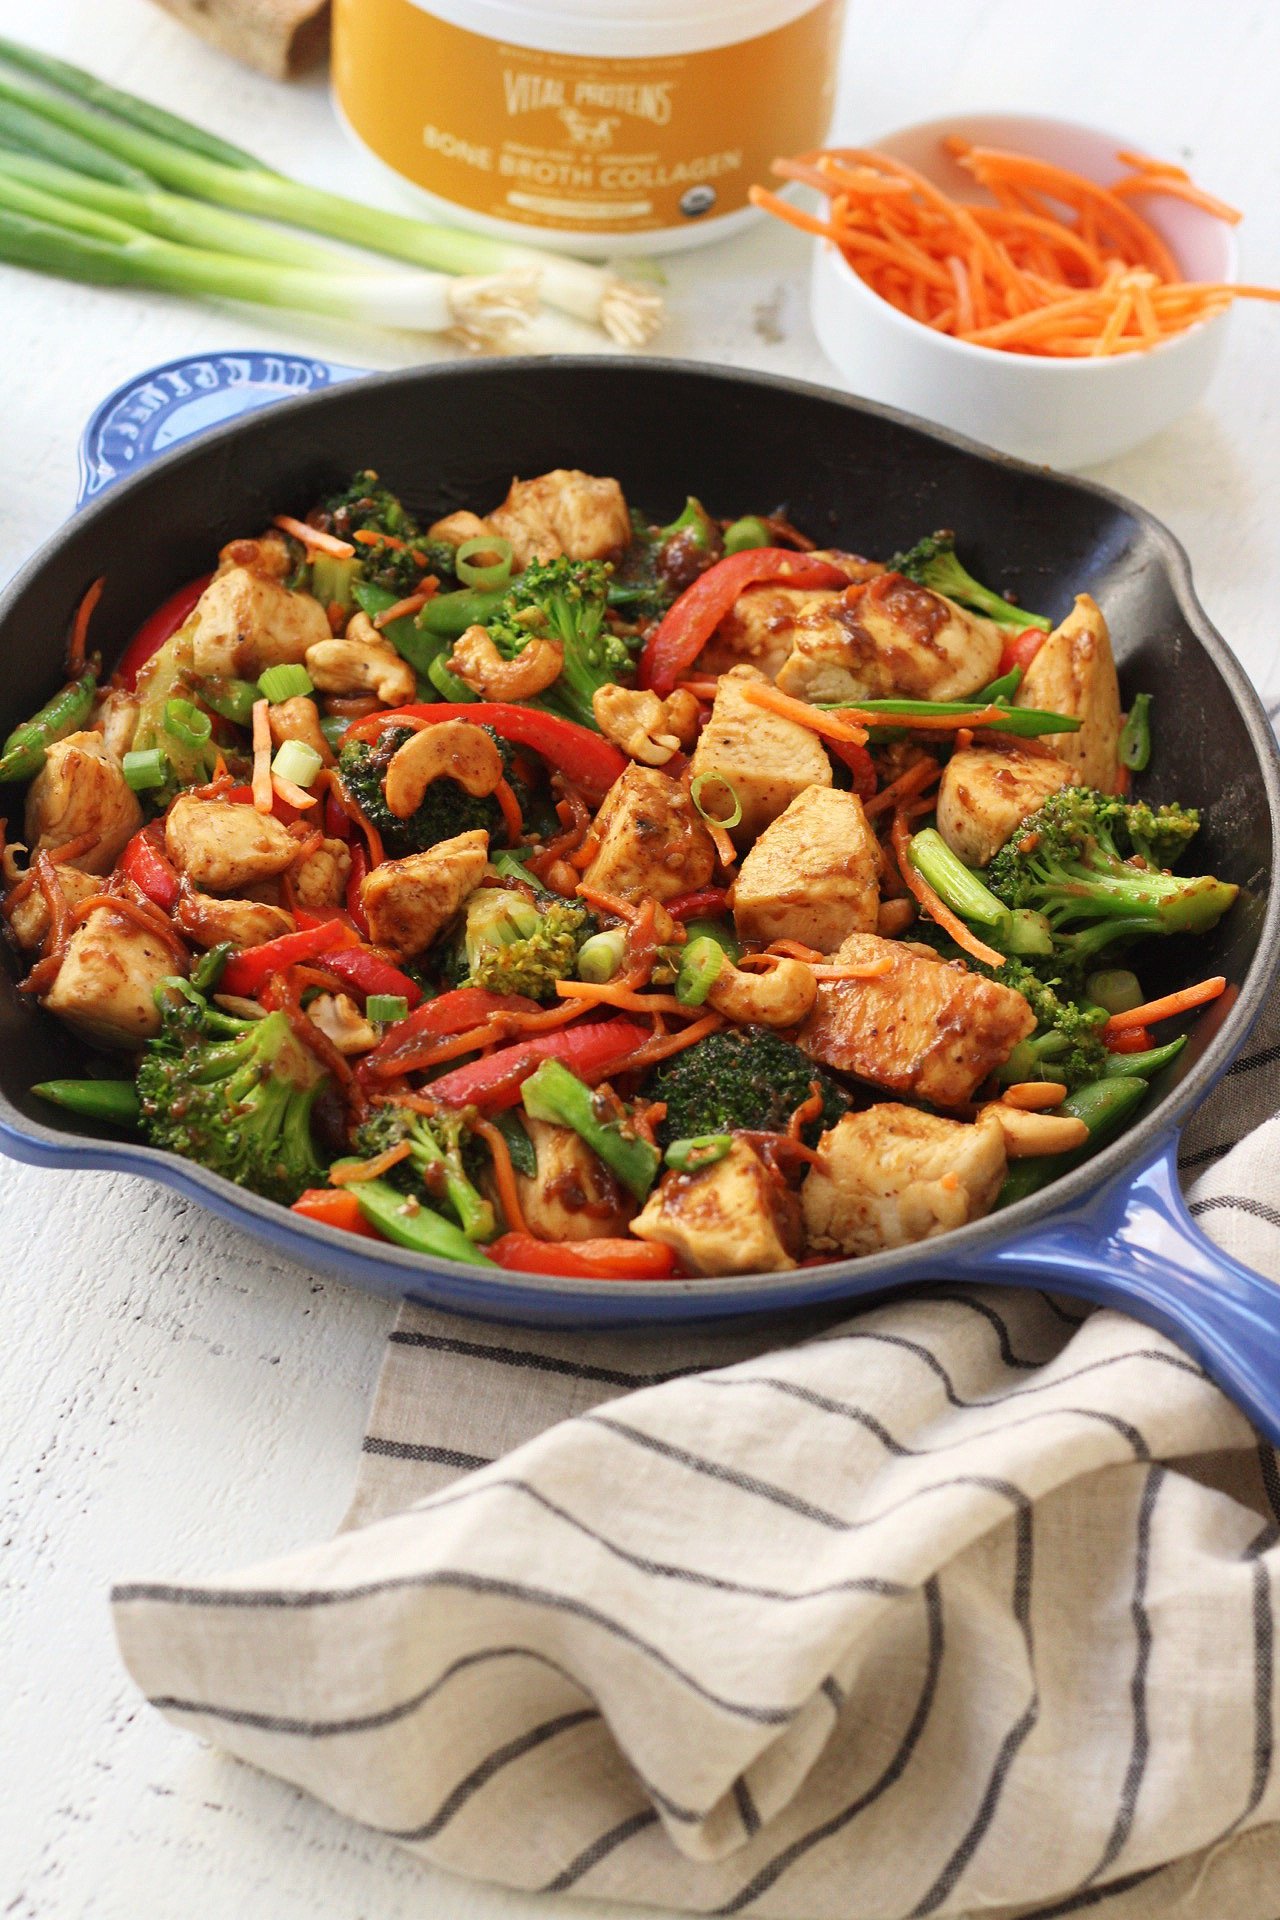 This easy paleo cashew chicken recipe will make healthy eating both delicious and easy whether you're doing a Whole30 or not! It's made completely in one pot, and in under 30 minutes. It's a family friendly, takeout fake-out recipe that's totally good for you! It's even made with a Paleo almond butter "peanut sauce"! #whole30cashewchicken #paleocashewchicken #whole30chickenstirfry #paleochickenrecipes